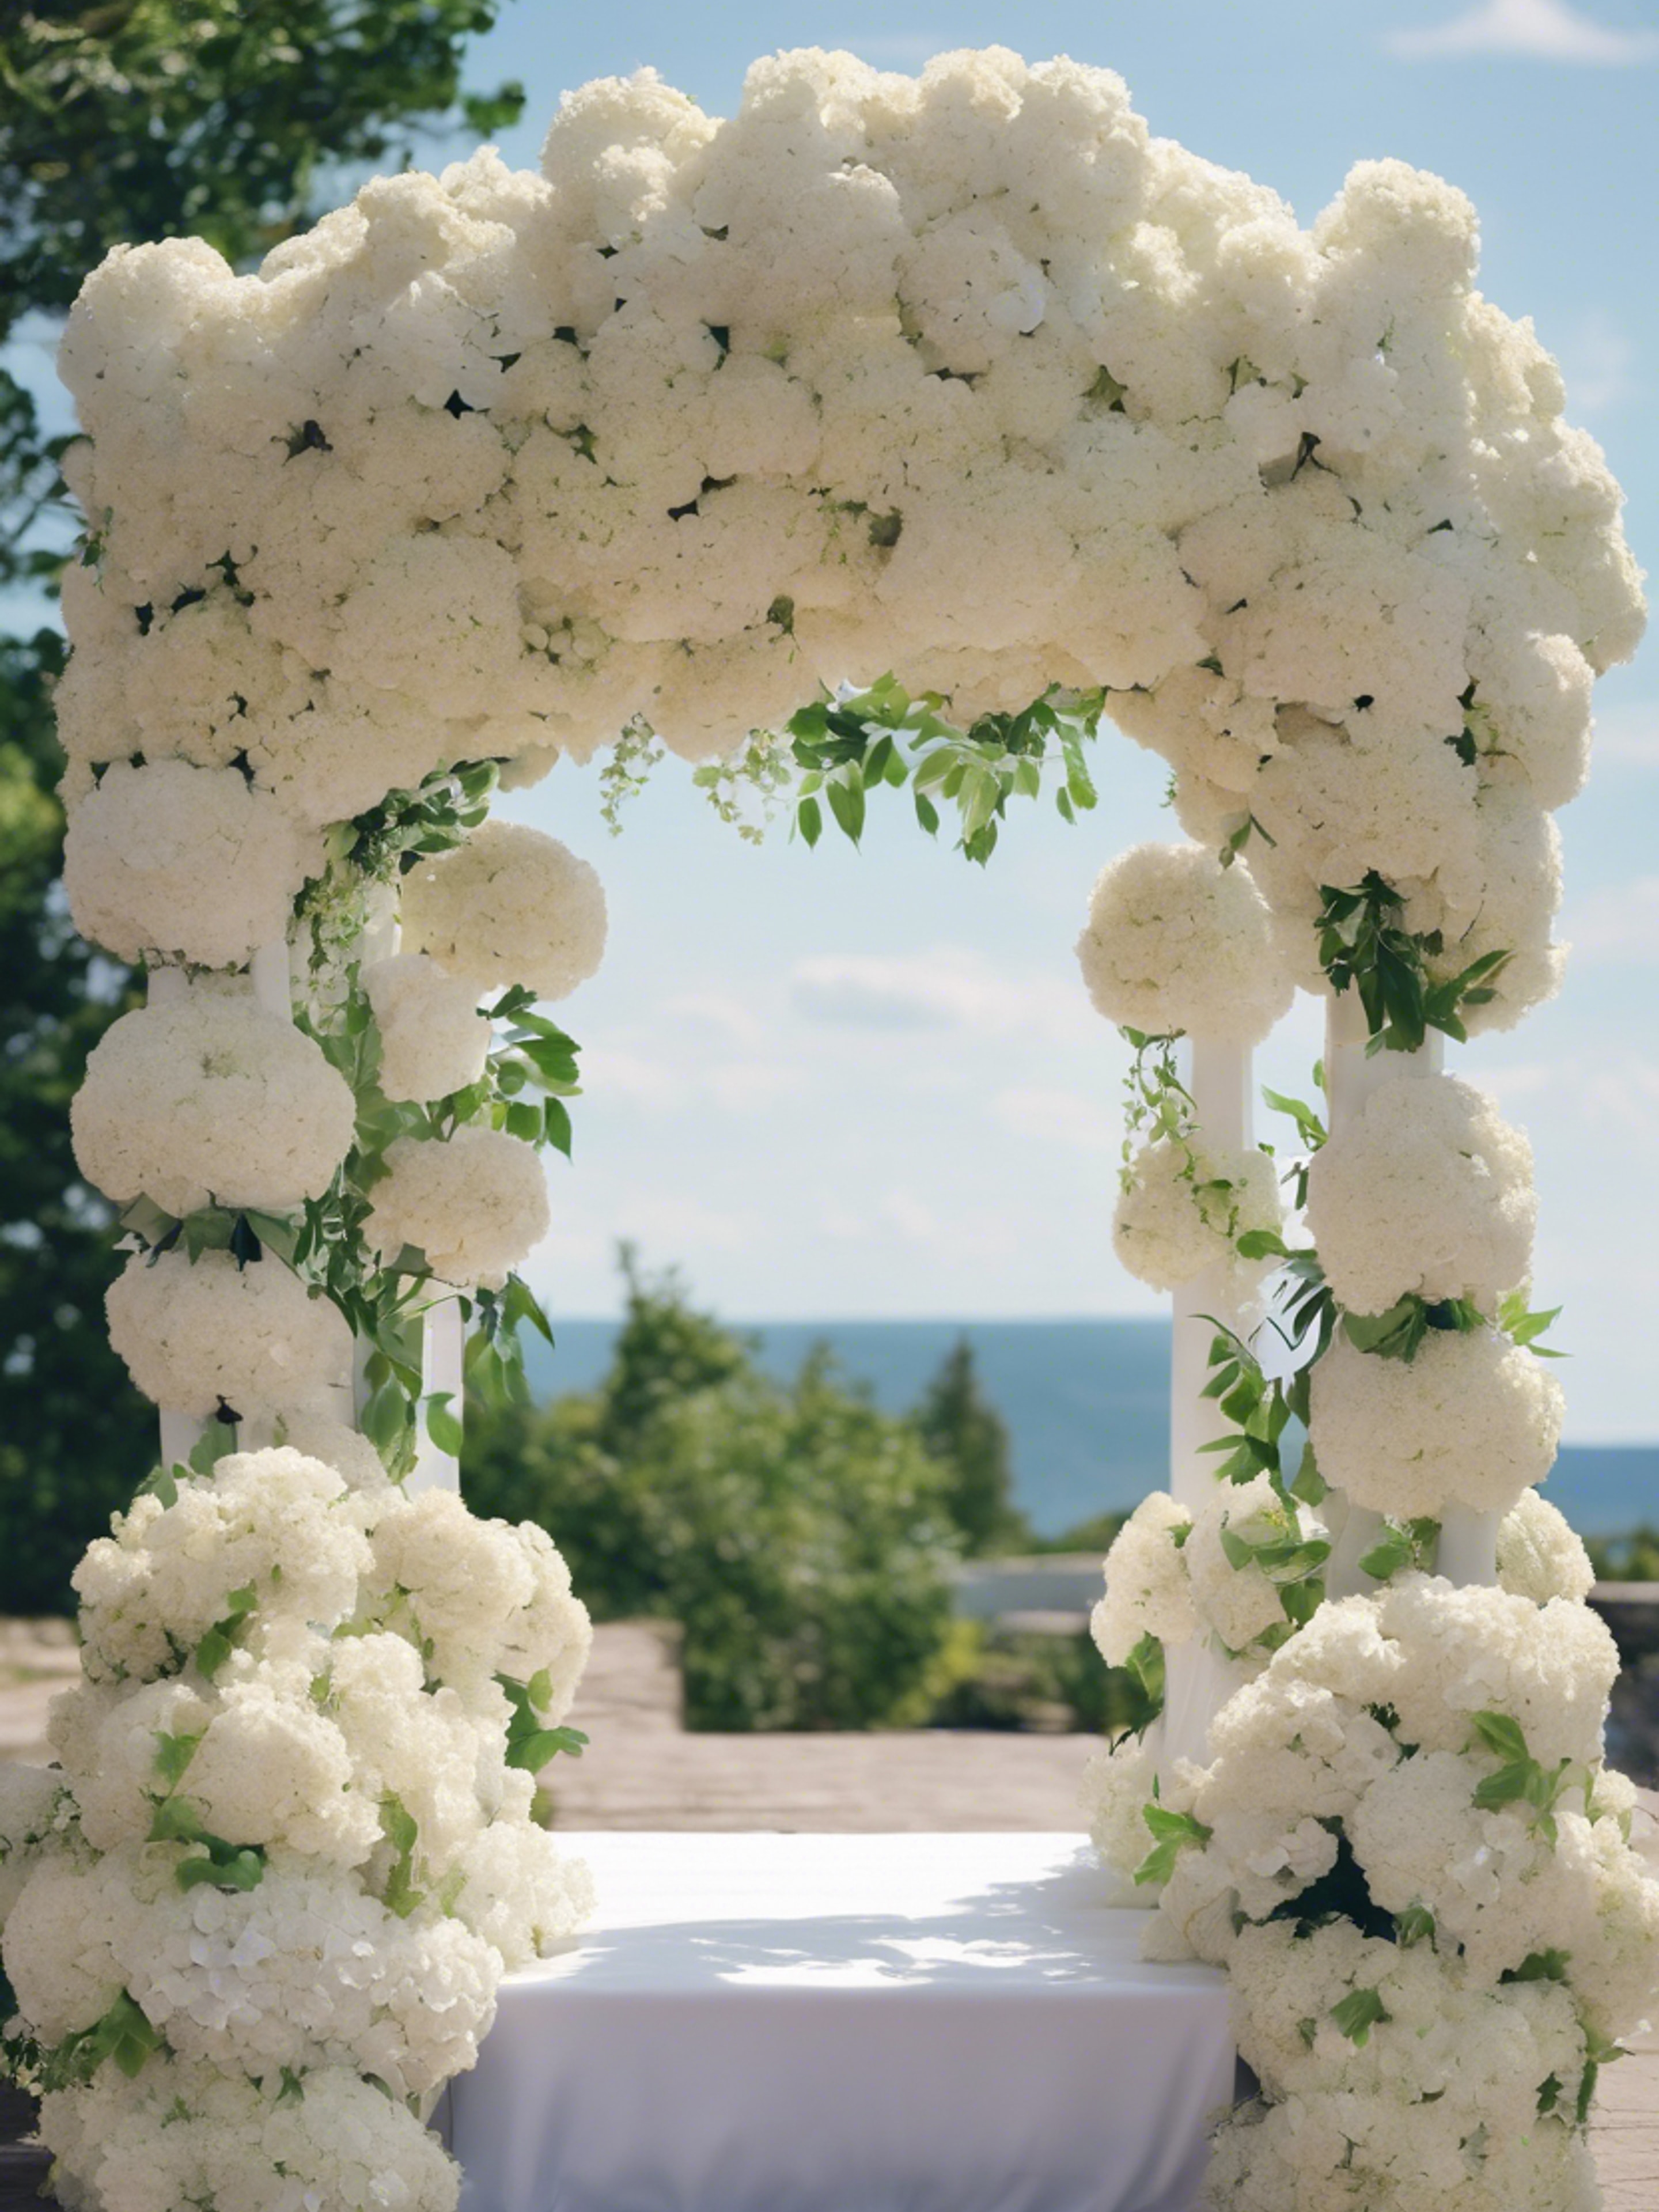 A wedding altar beautifully adorned with white hydrangeas under an open sky.壁紙[f43ab9123f1f4d59942d]